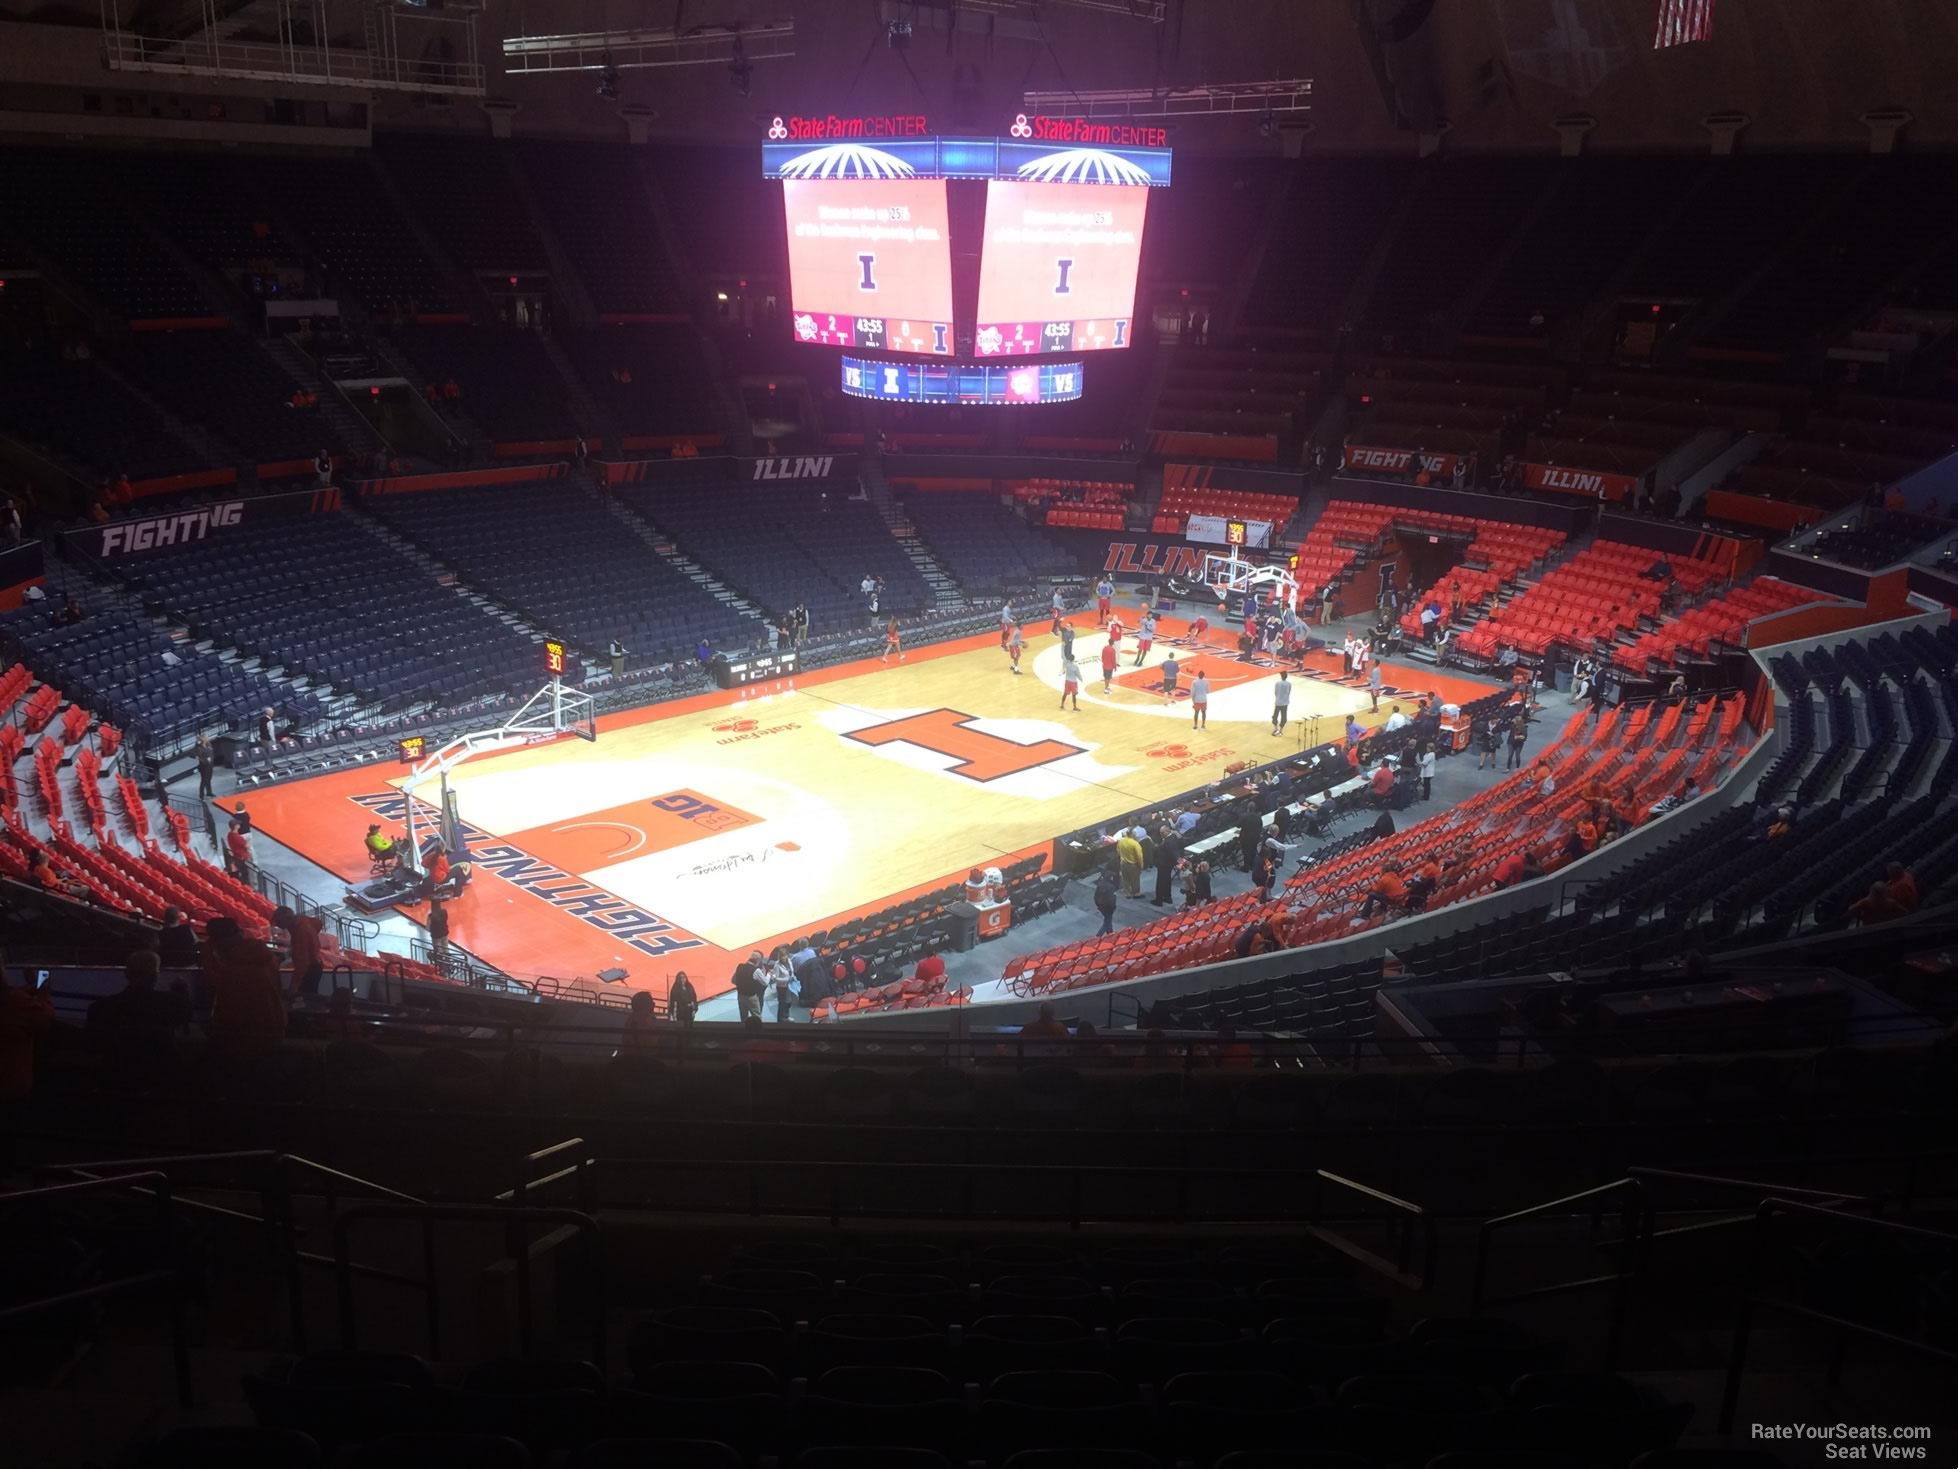 section 231, row 10 seat view  - state farm center